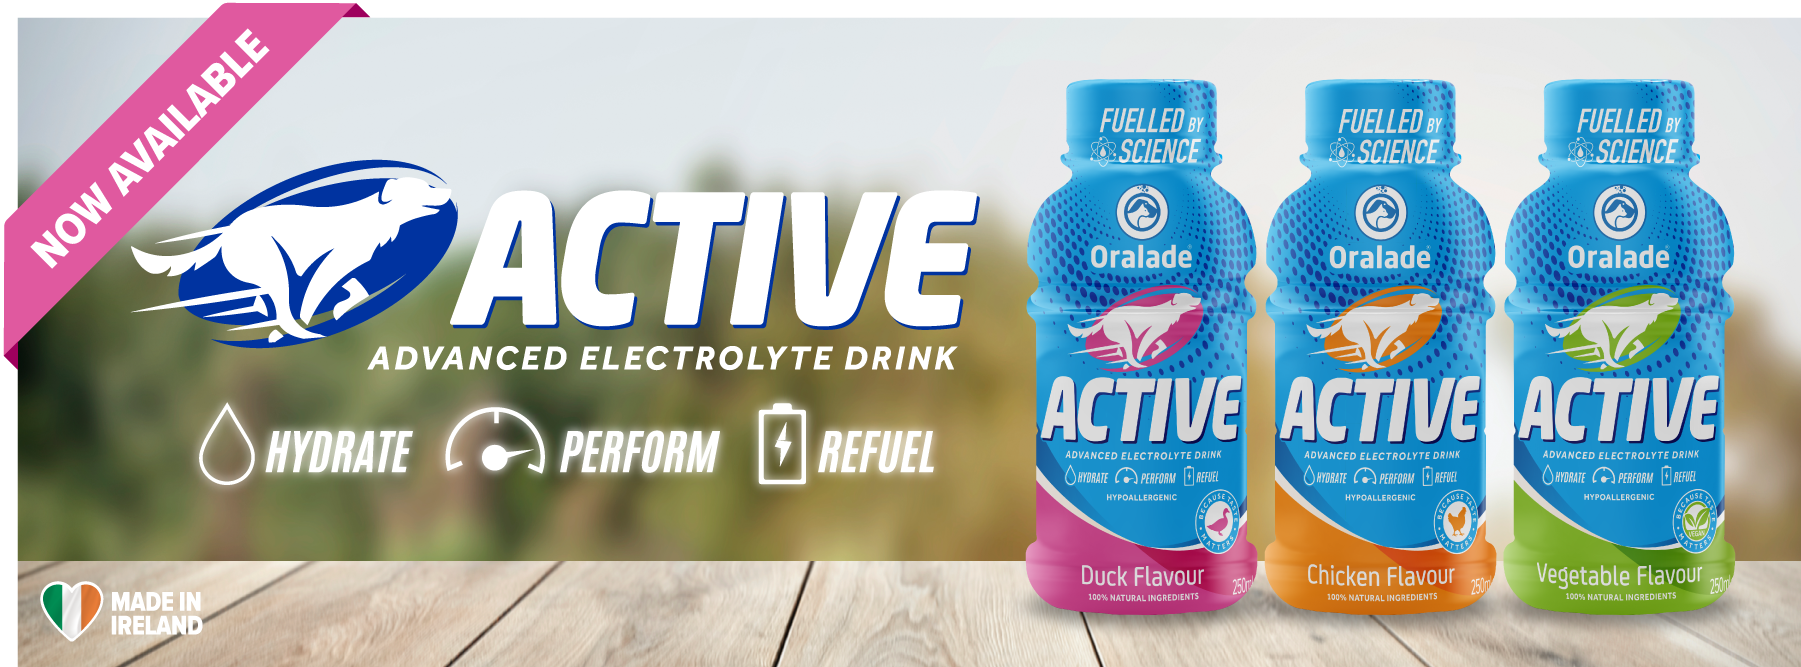 Oralade Active Now Available